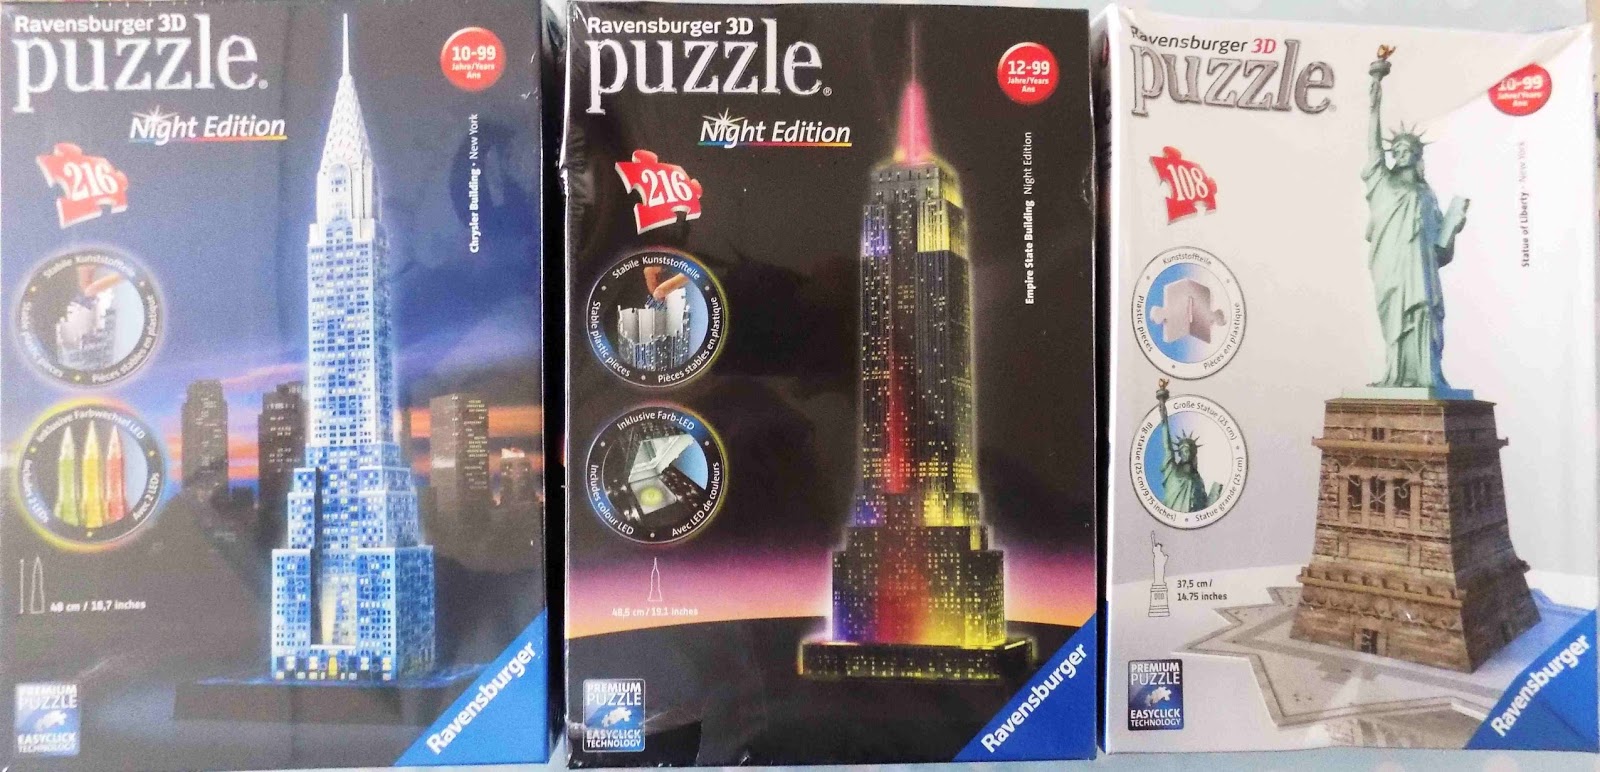 Madhouse Family Reviews: Ravensburger New York 3D Puzzle Buildings